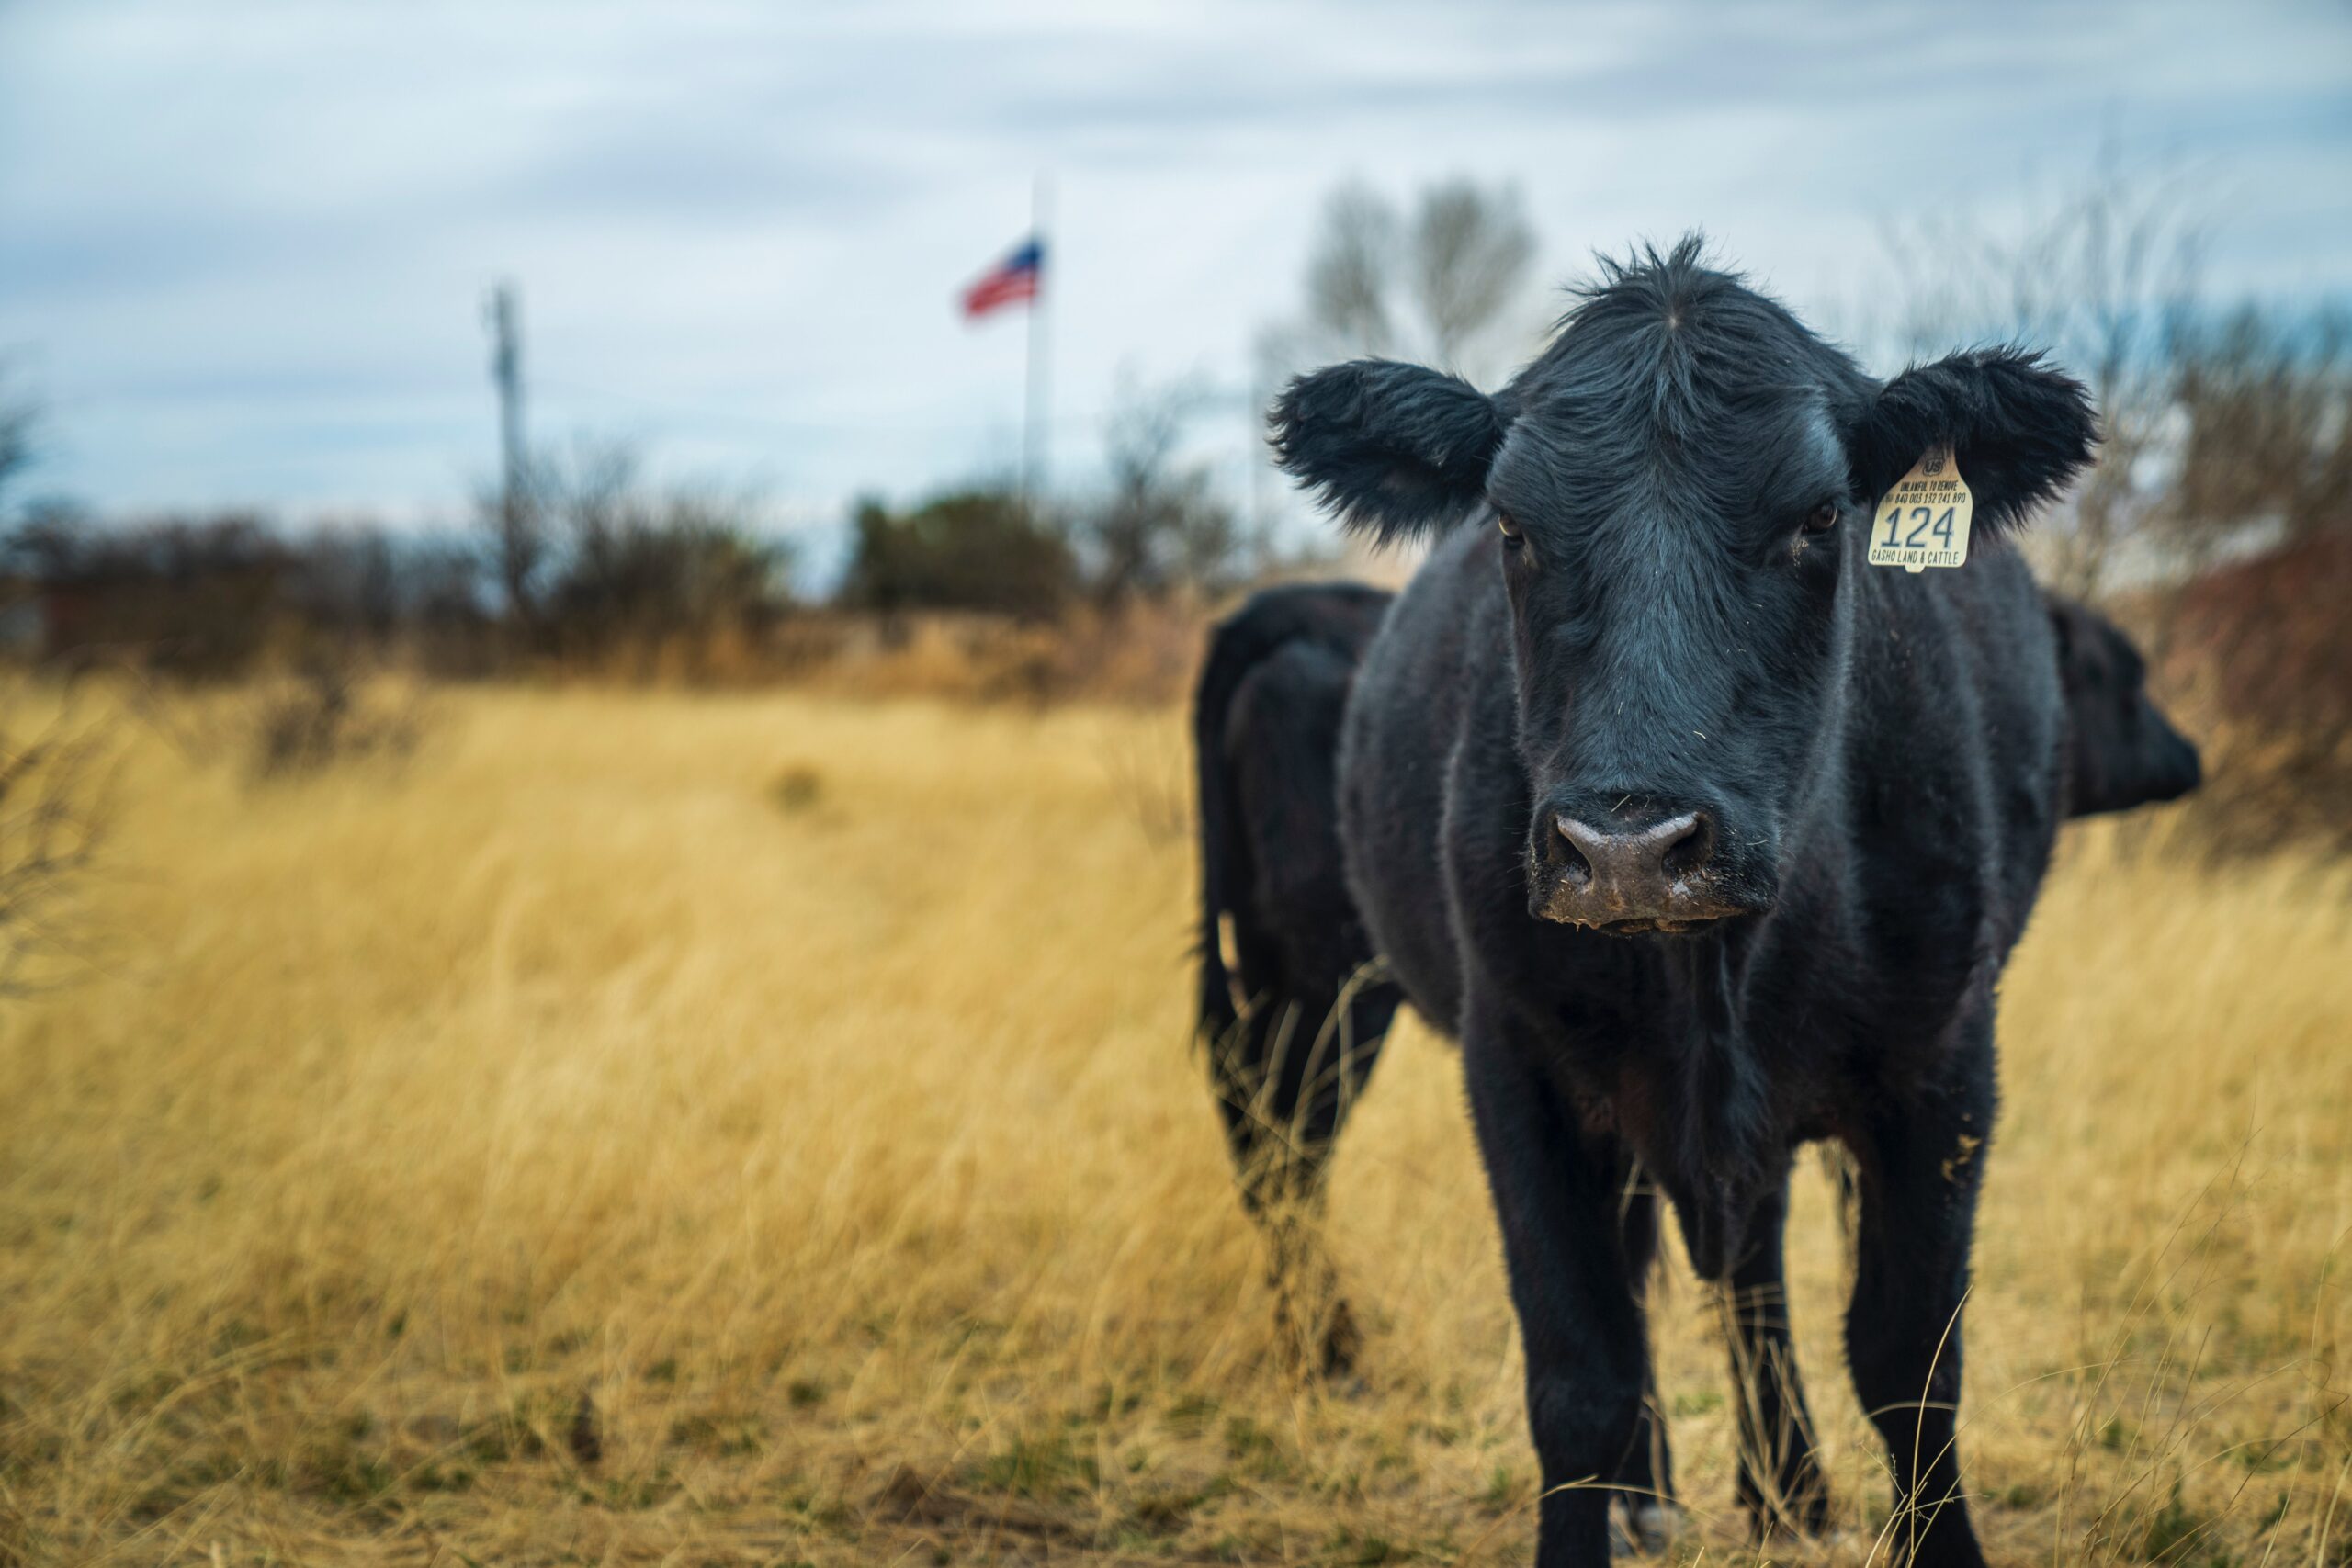 Two black Angus cows standing in a winter field with an American flag in the distance.